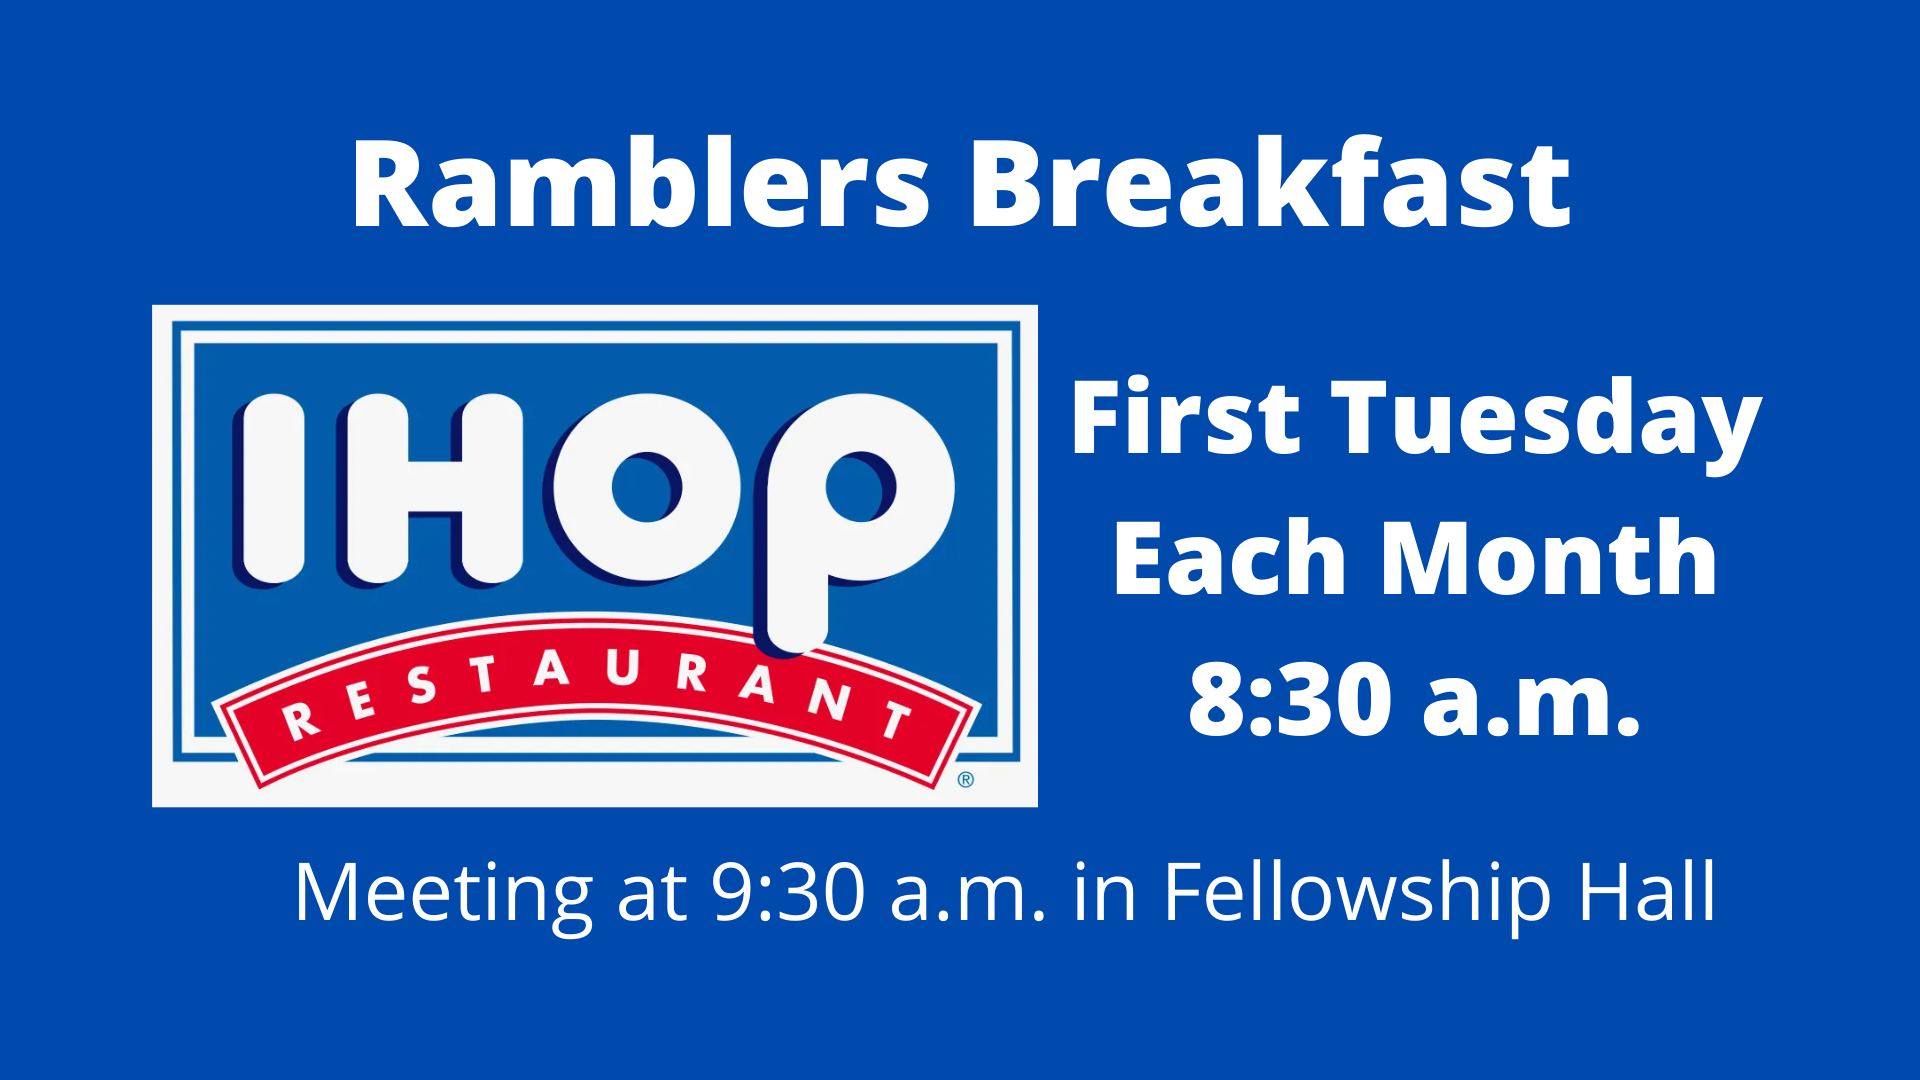 Join Us for Breakfast